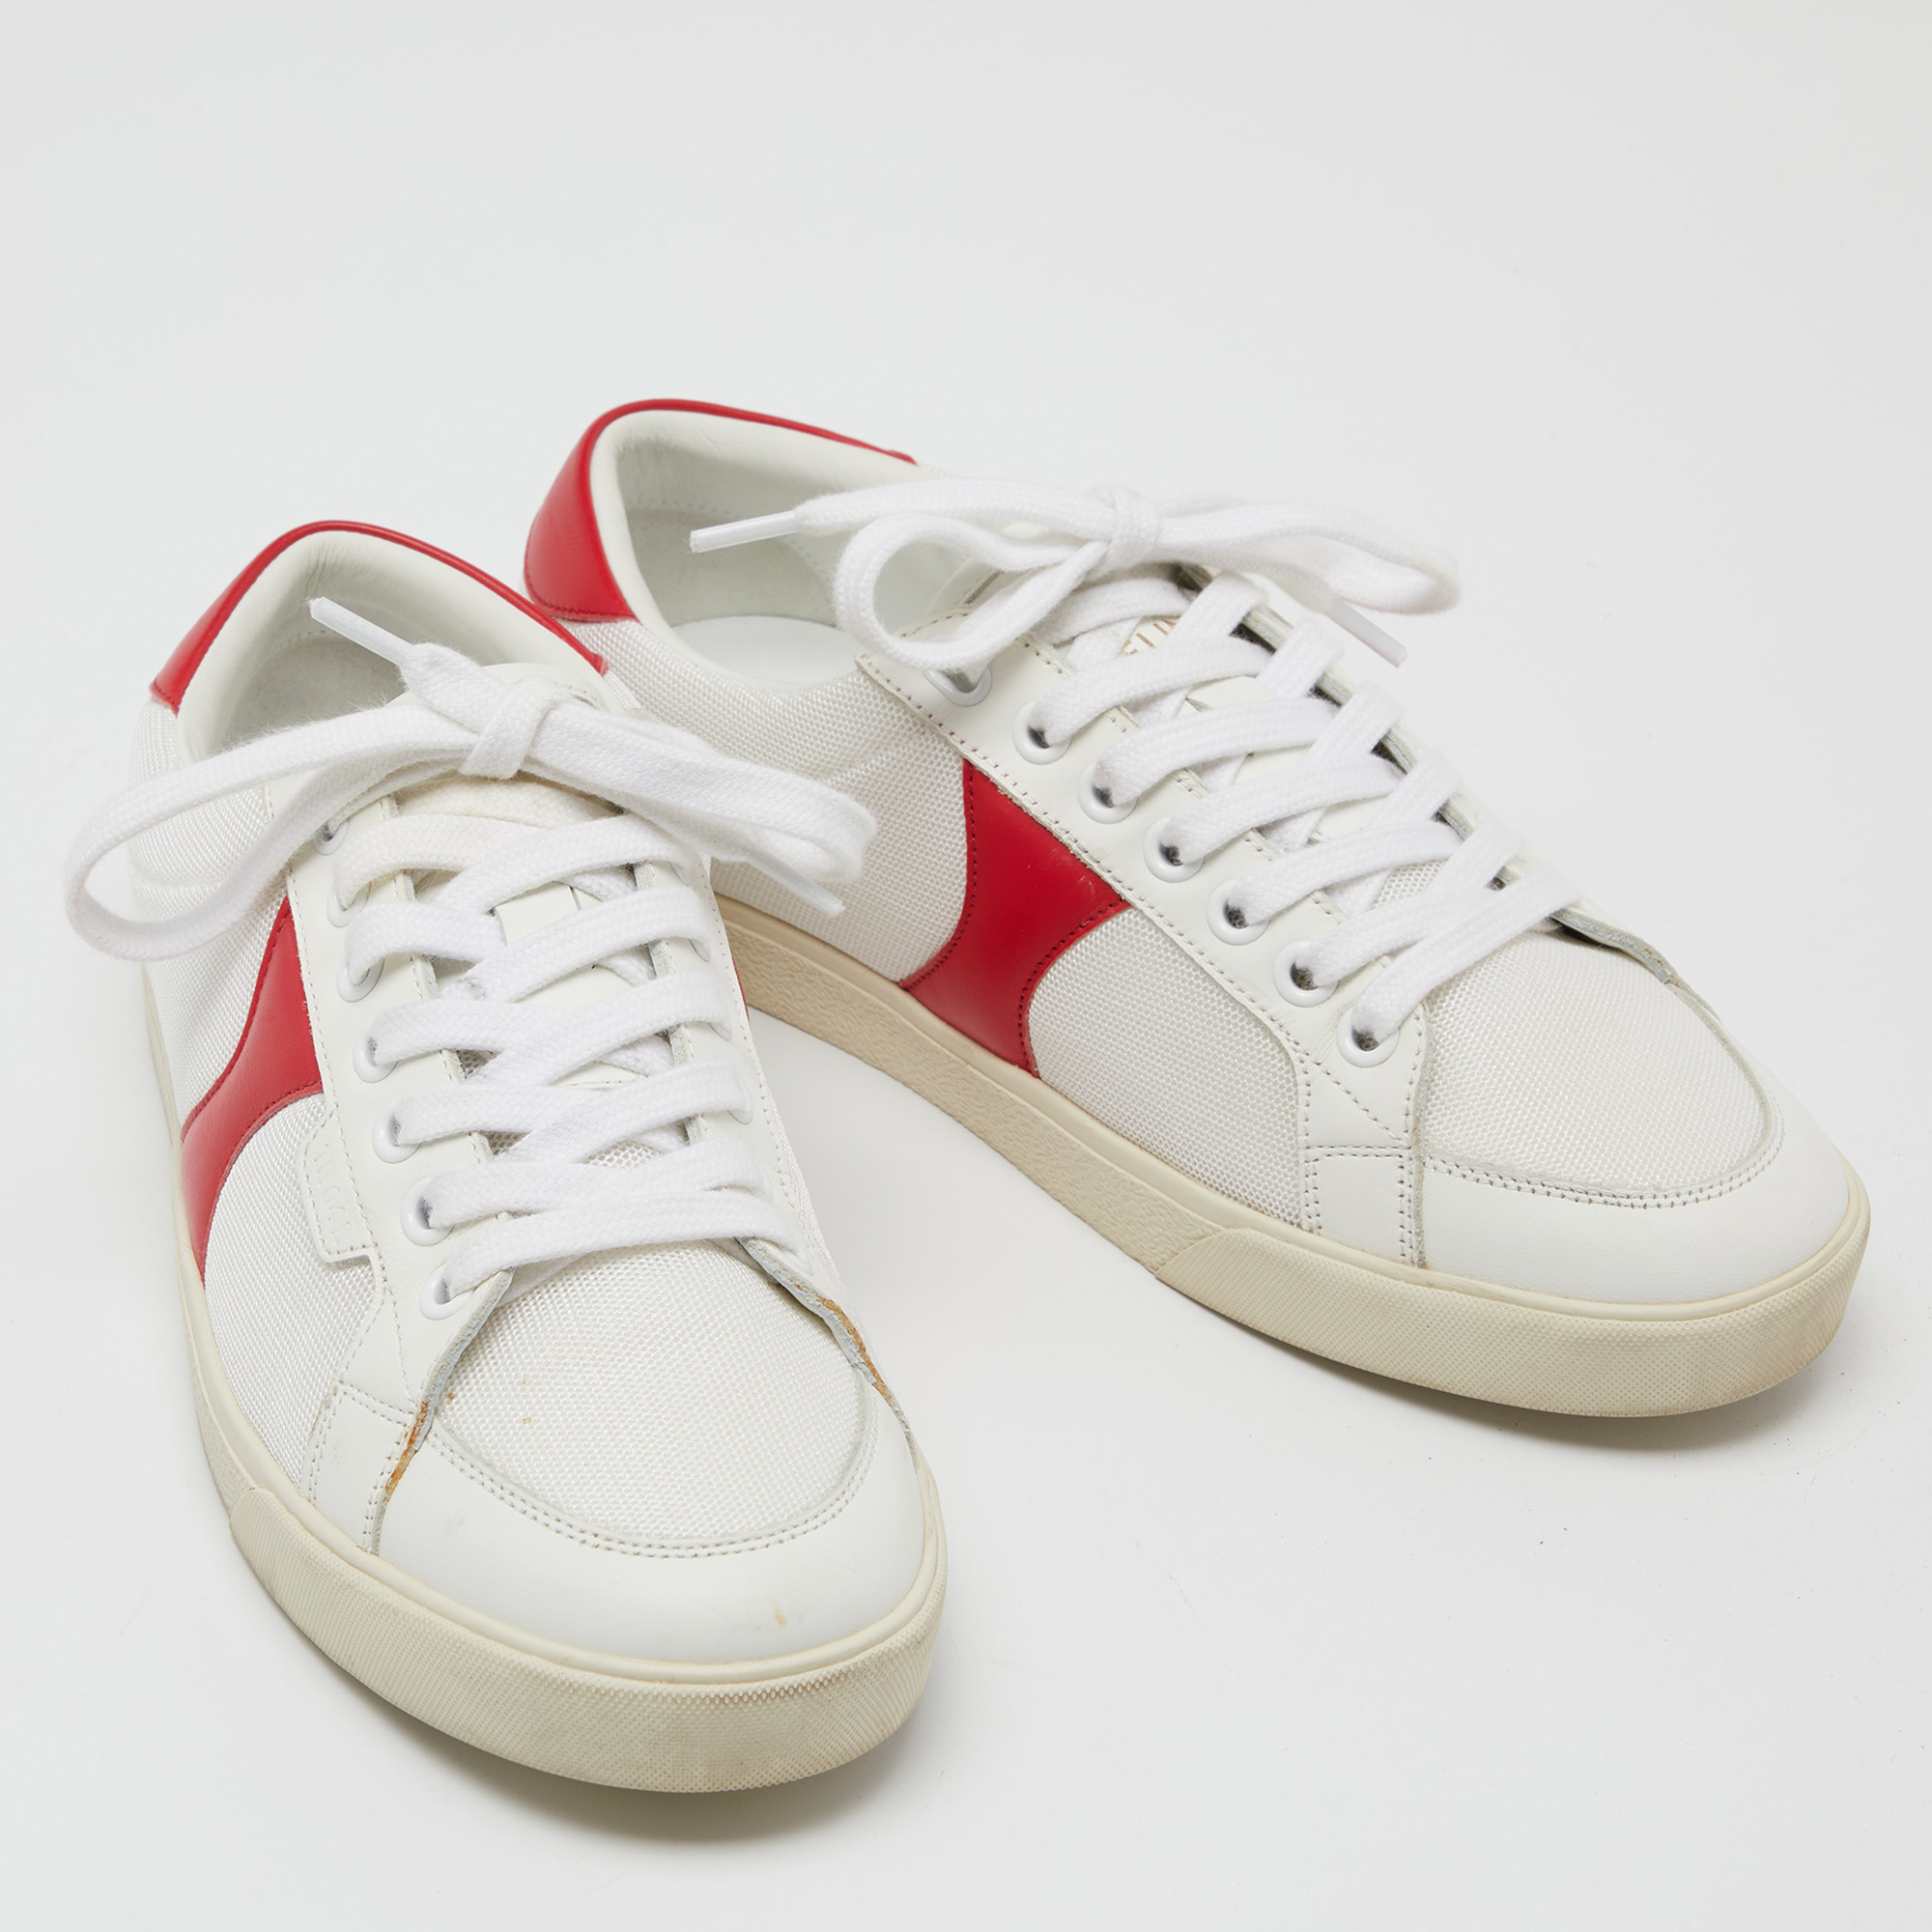 Celine White/Red Leather Colorblock Pattern Low Top Sneakers Size 37